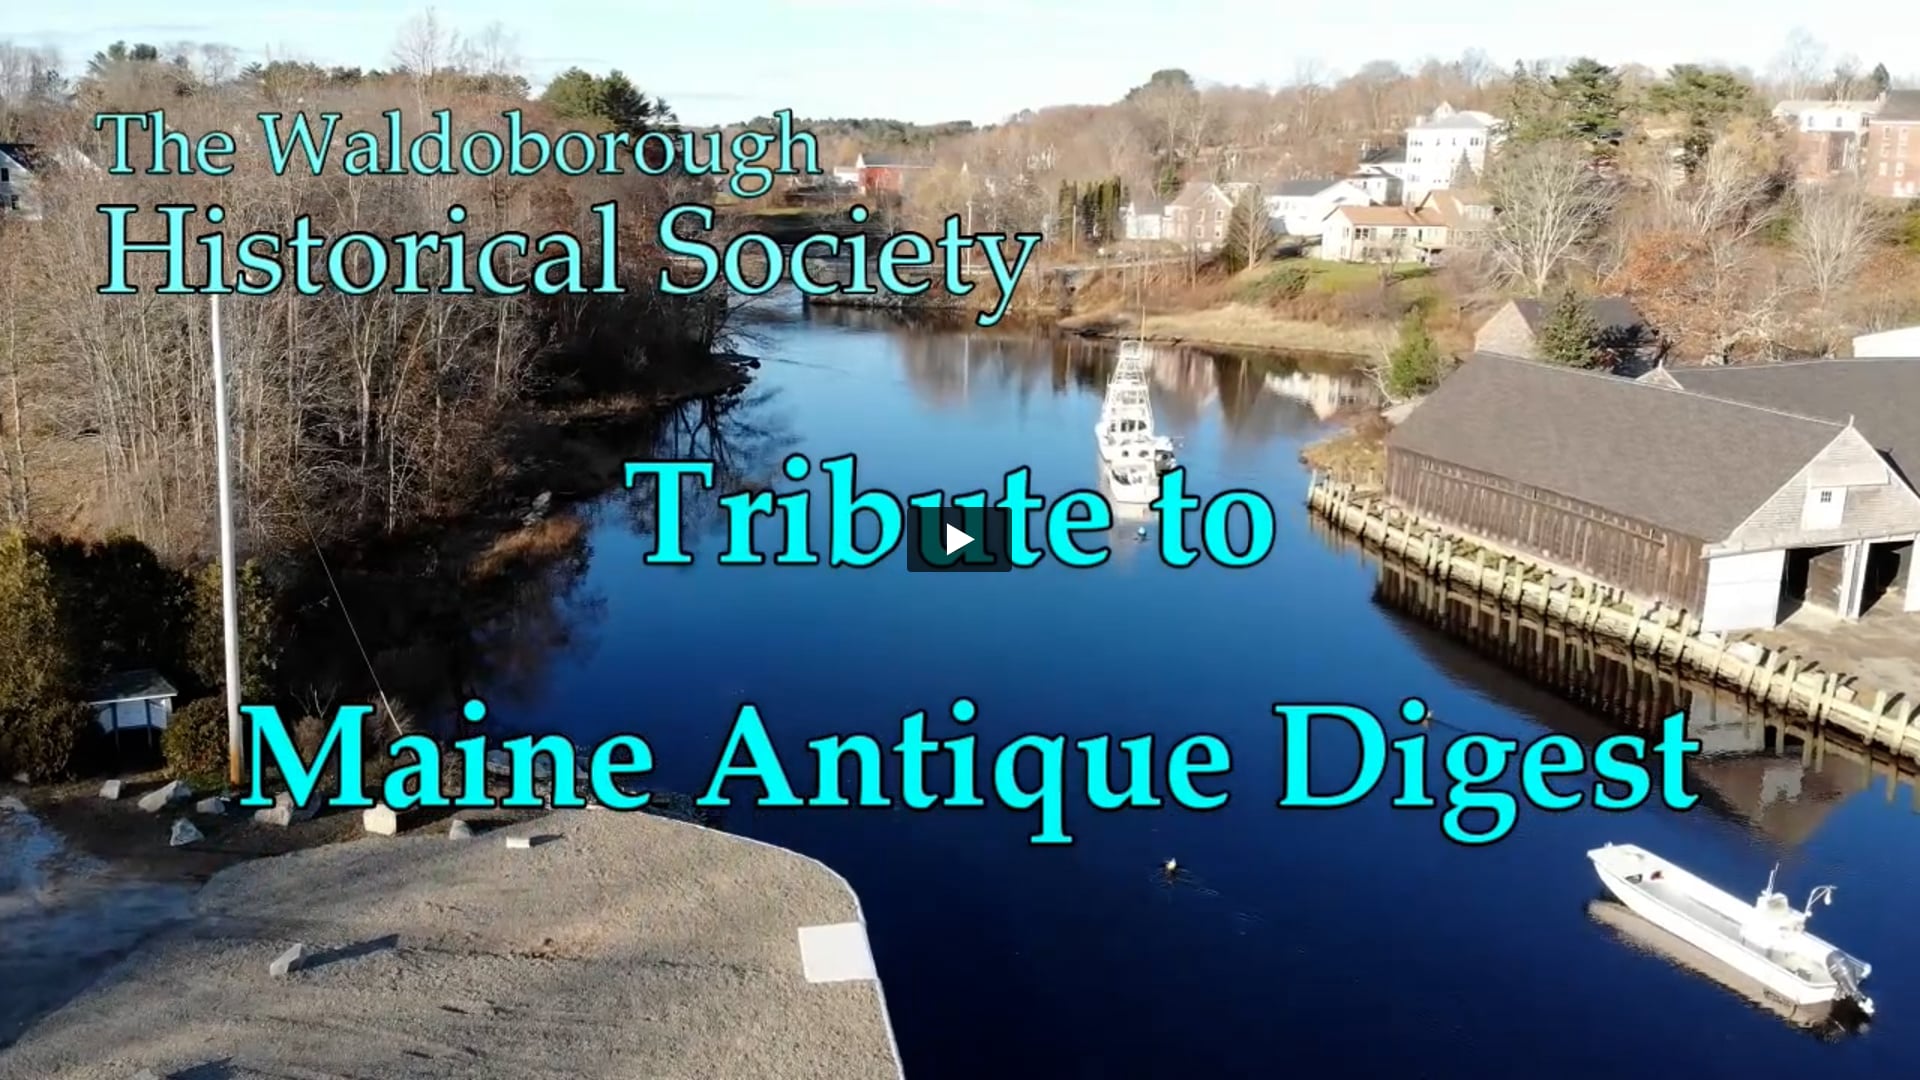 Waldoborough Historical Society: Tribute to Maine Antique Digest - July 31, 2022